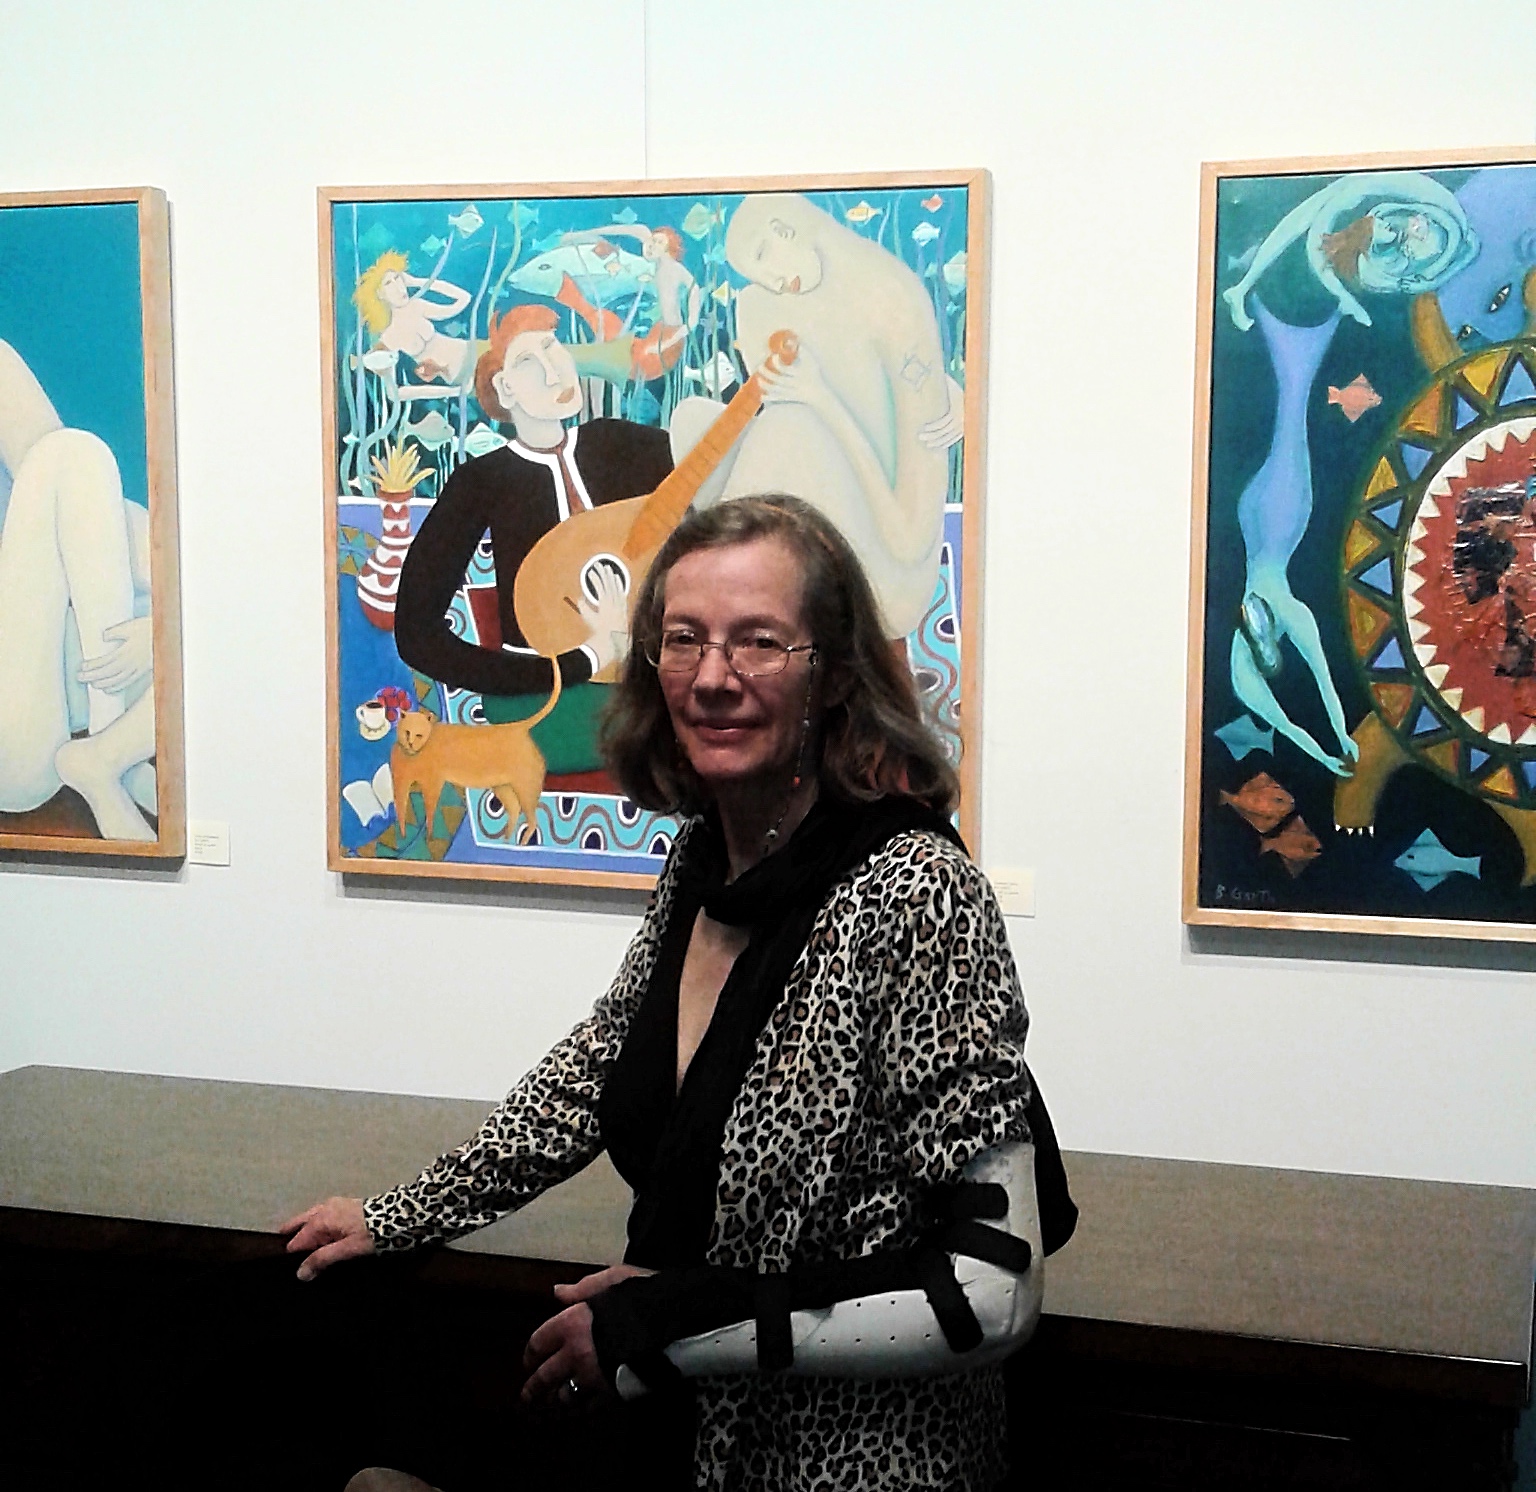 Bea Garth in front her painting The Music Genie, copyright 2018 at the Gallery @ Cerulean feb 2018